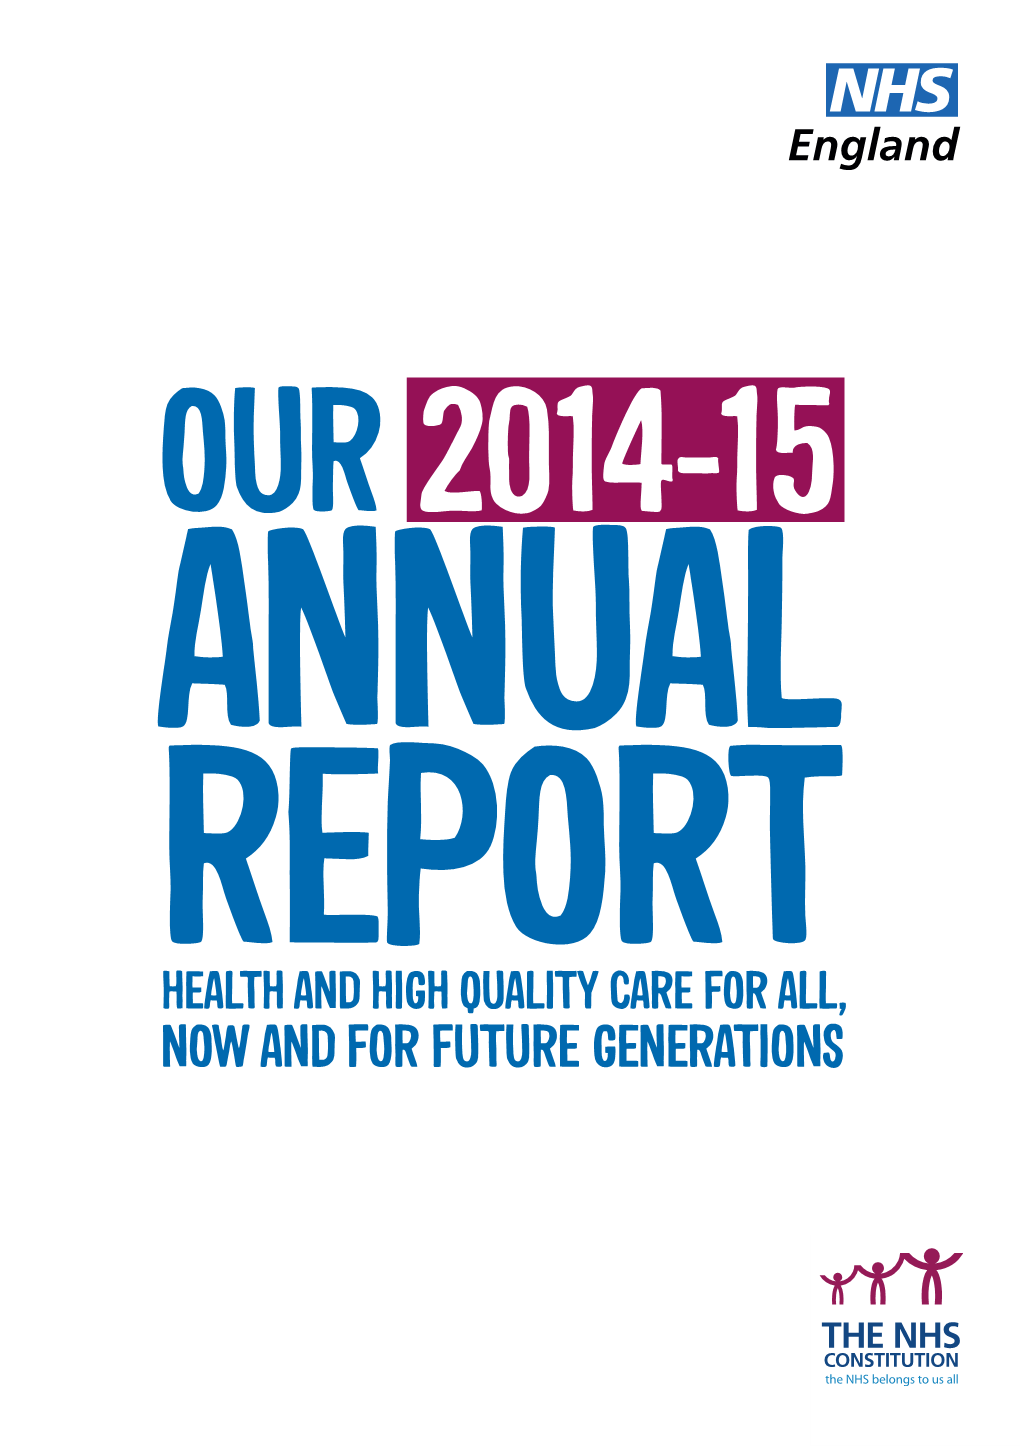 NHS England Annual Report Cover Final.Indd 1 21/07/2015 16:50 NHS ENGLAND